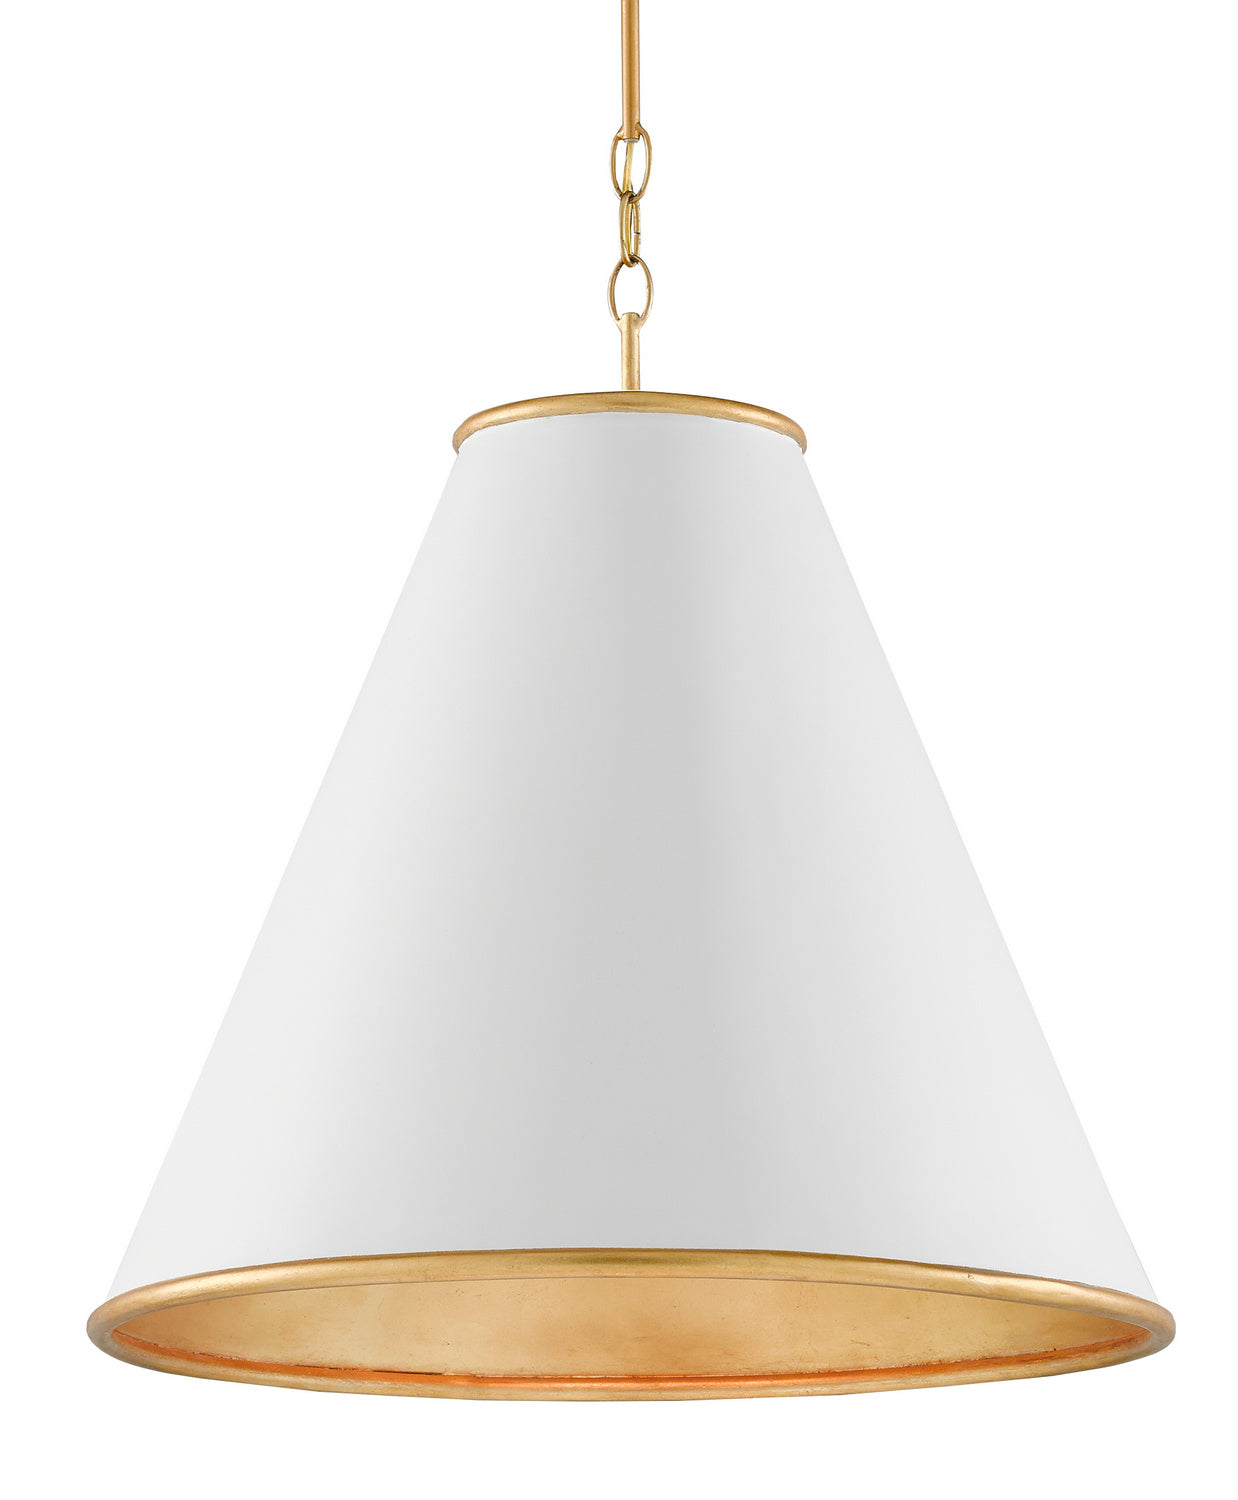 Currey and Company - One Light Pendant - Pierrepont - Painted Gesso White/Contemporary Gold Leaf/Painted Gold- Union Lighting Luminaires Decor